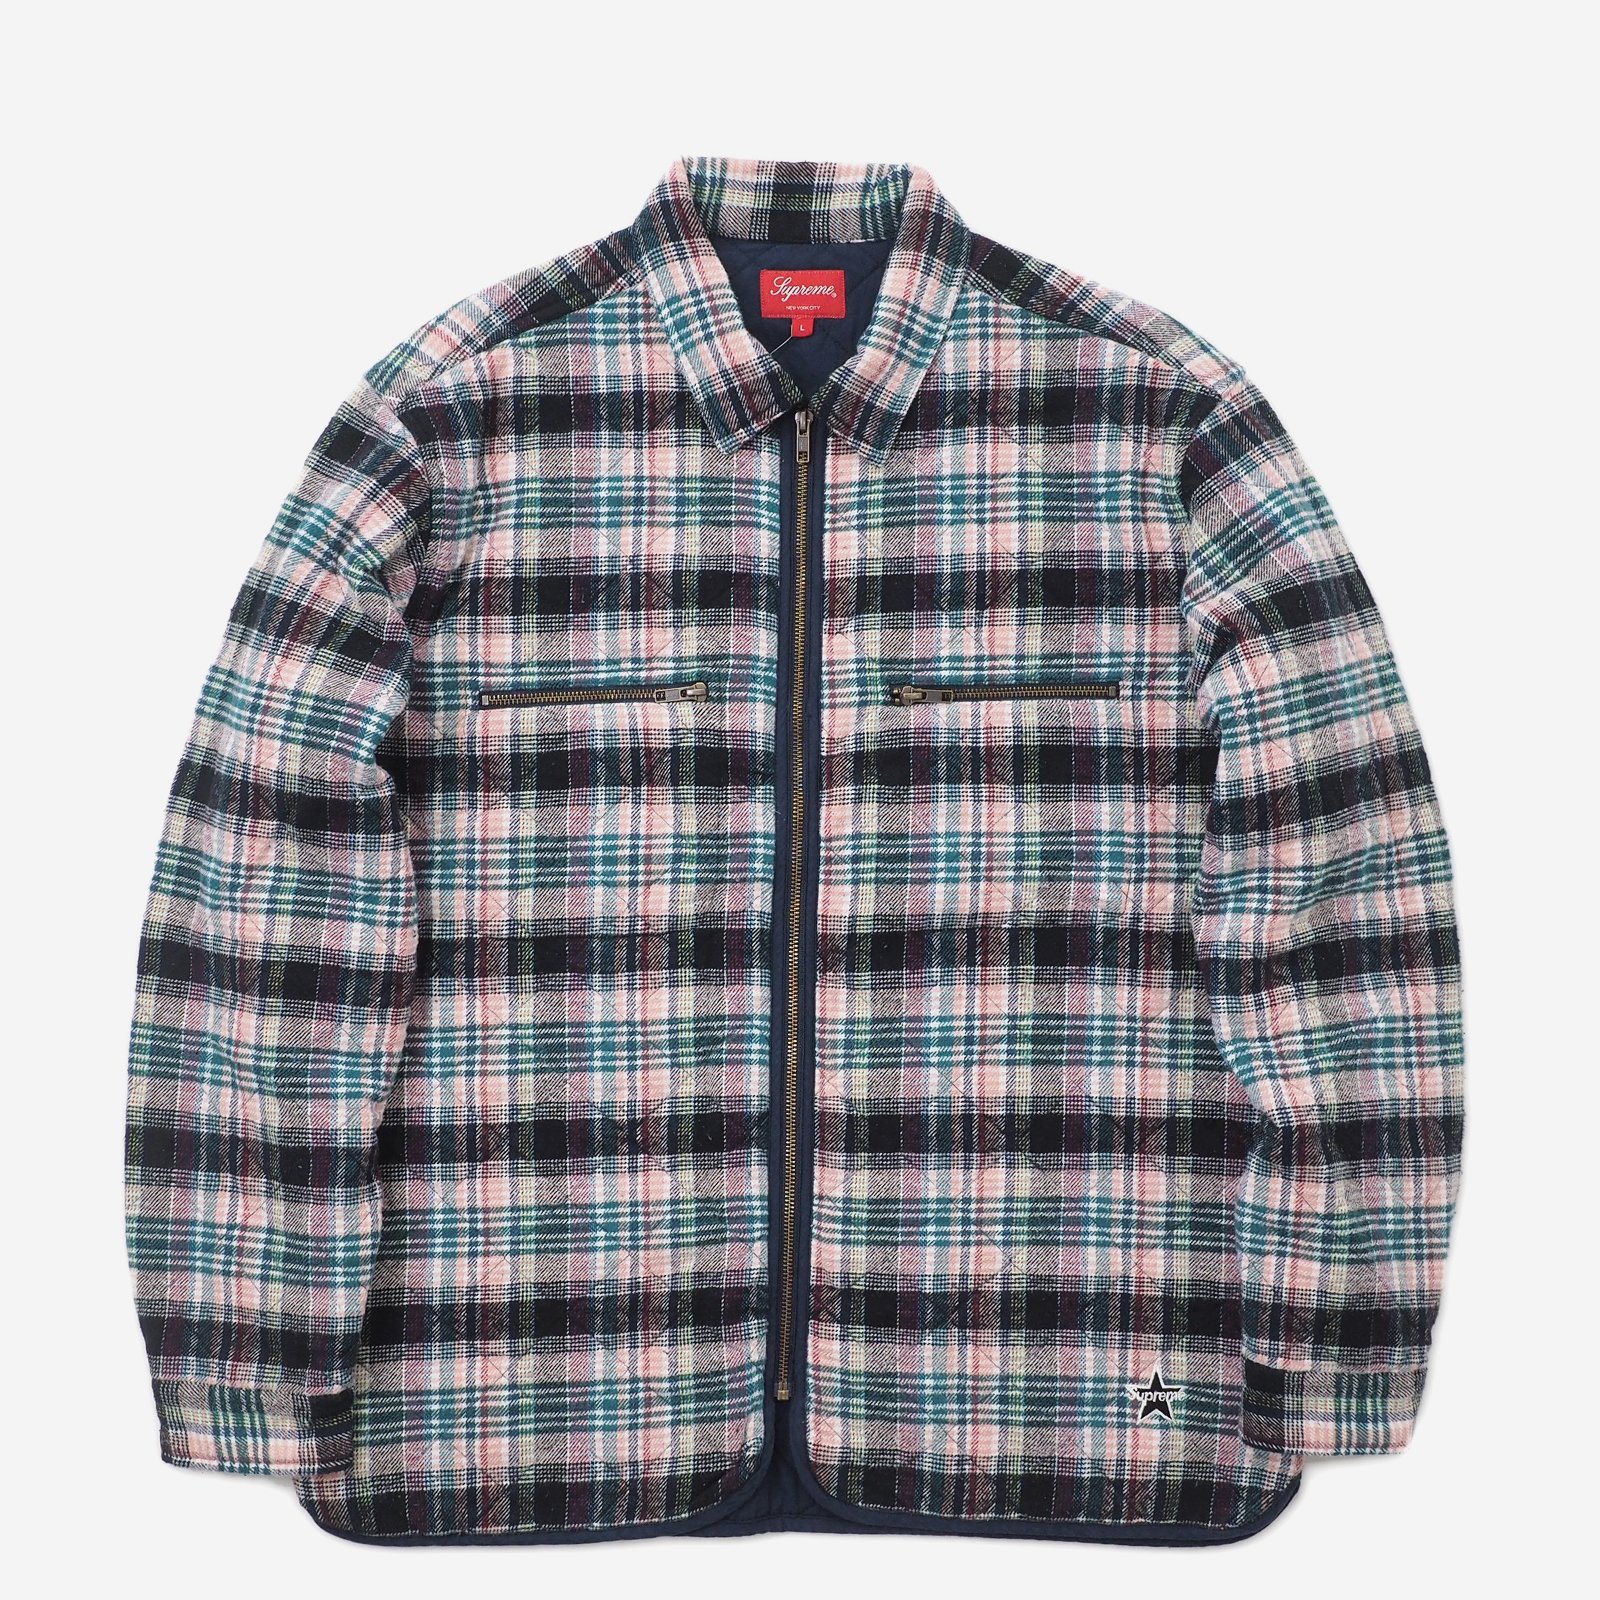 Very Goods | Supreme - Quilted Plaid Zip Up Shirt - UG.SHAFT